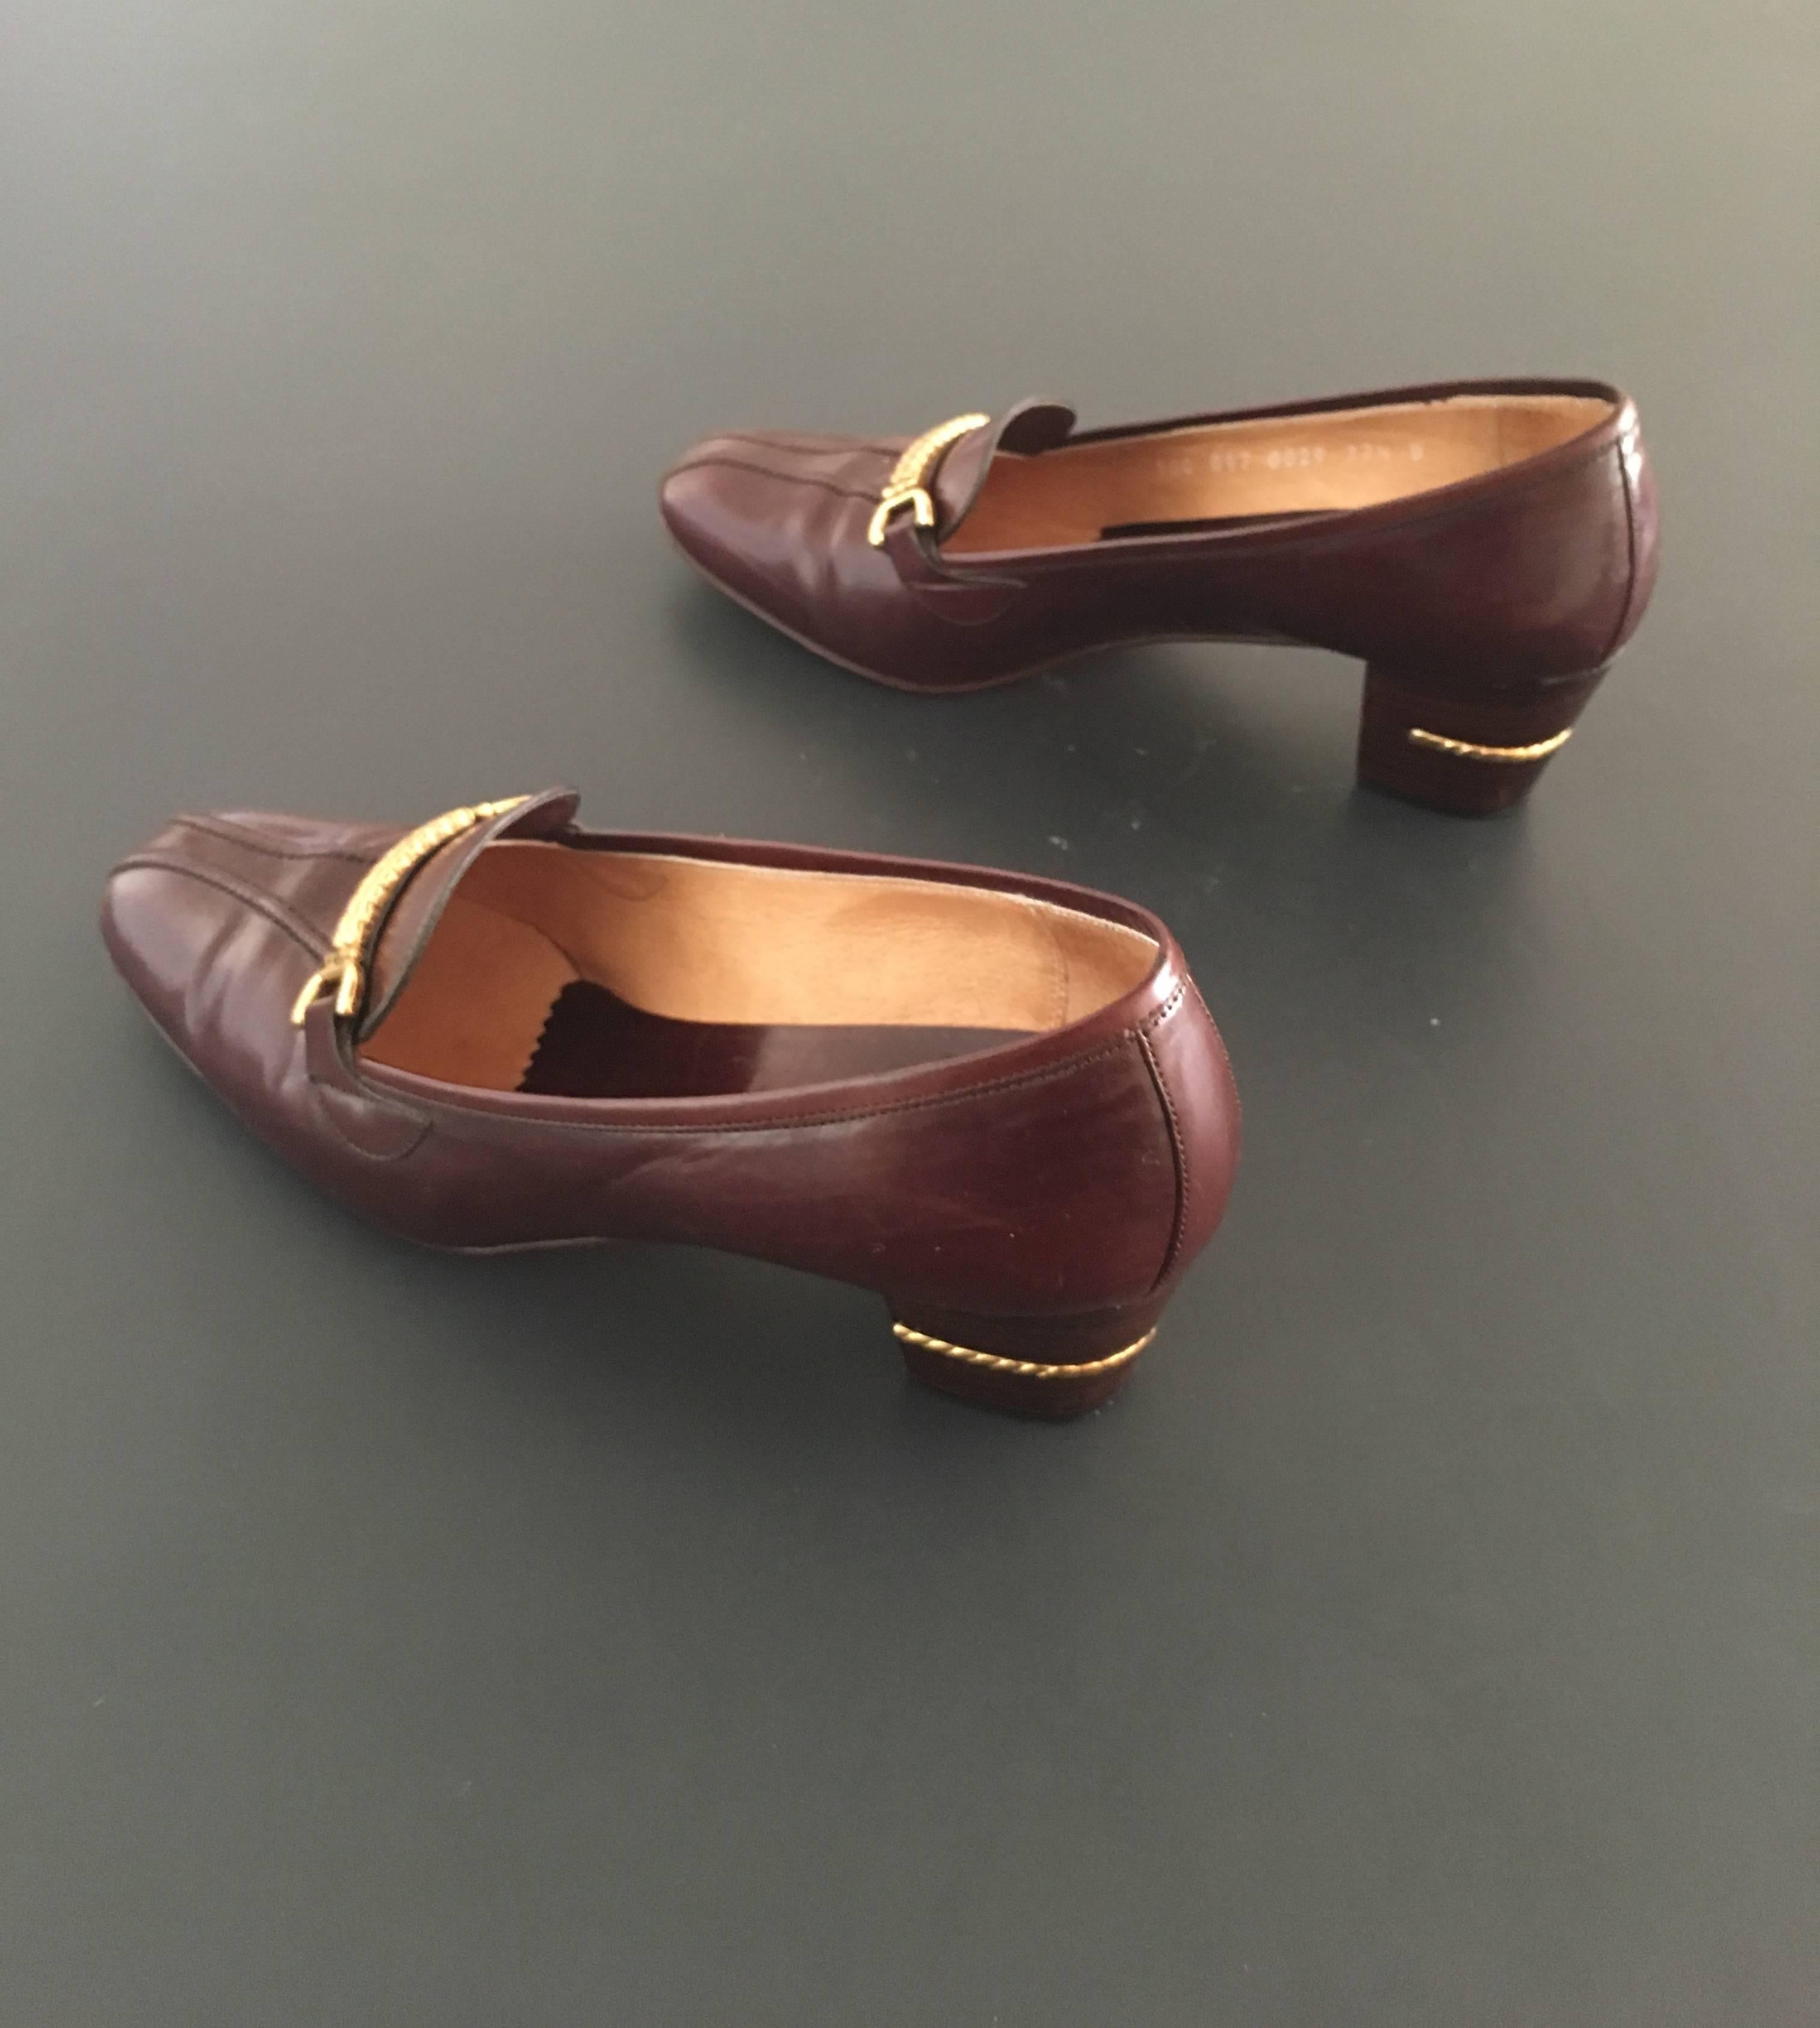 Black Gucci Brown Leather Heeled Loafer with Gold Braid Buckle Size 37.1/2 B.